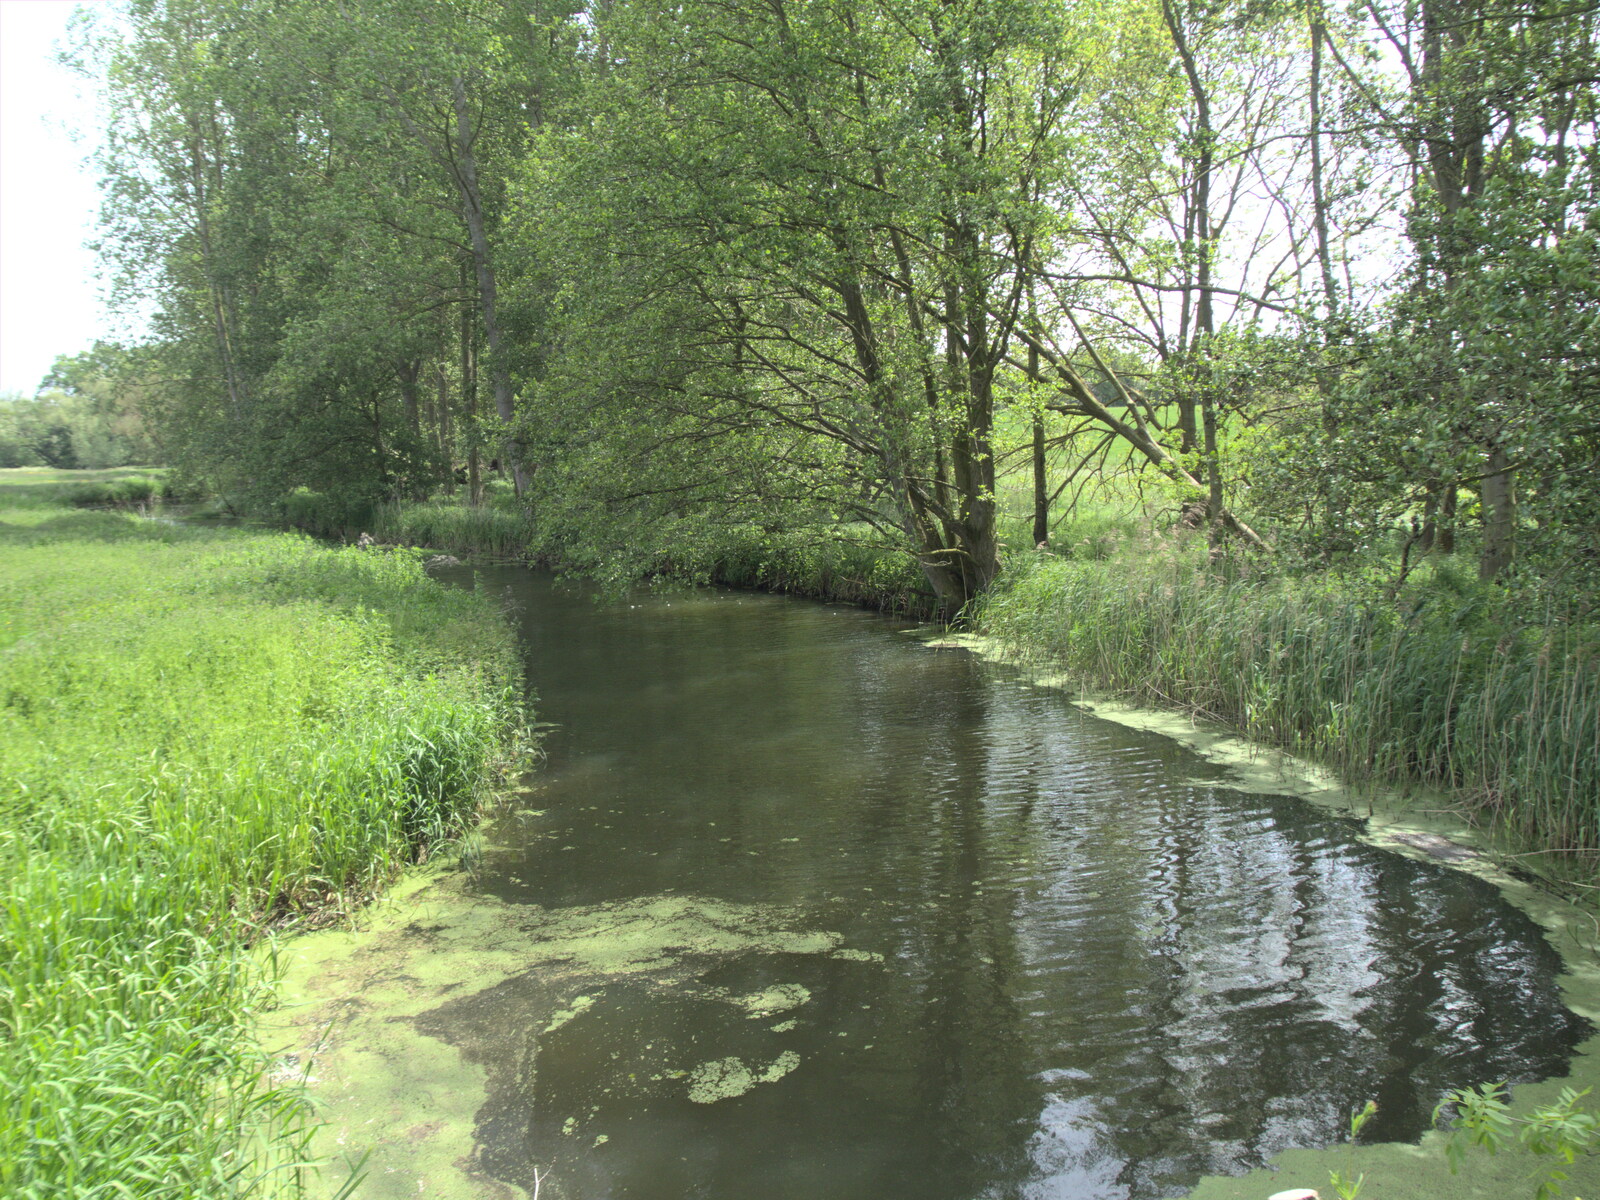 The River Waveney near Hoxne from A Quest for the Fabled Swimming Spot, Hoxne, Suffolk - 29th May 2023